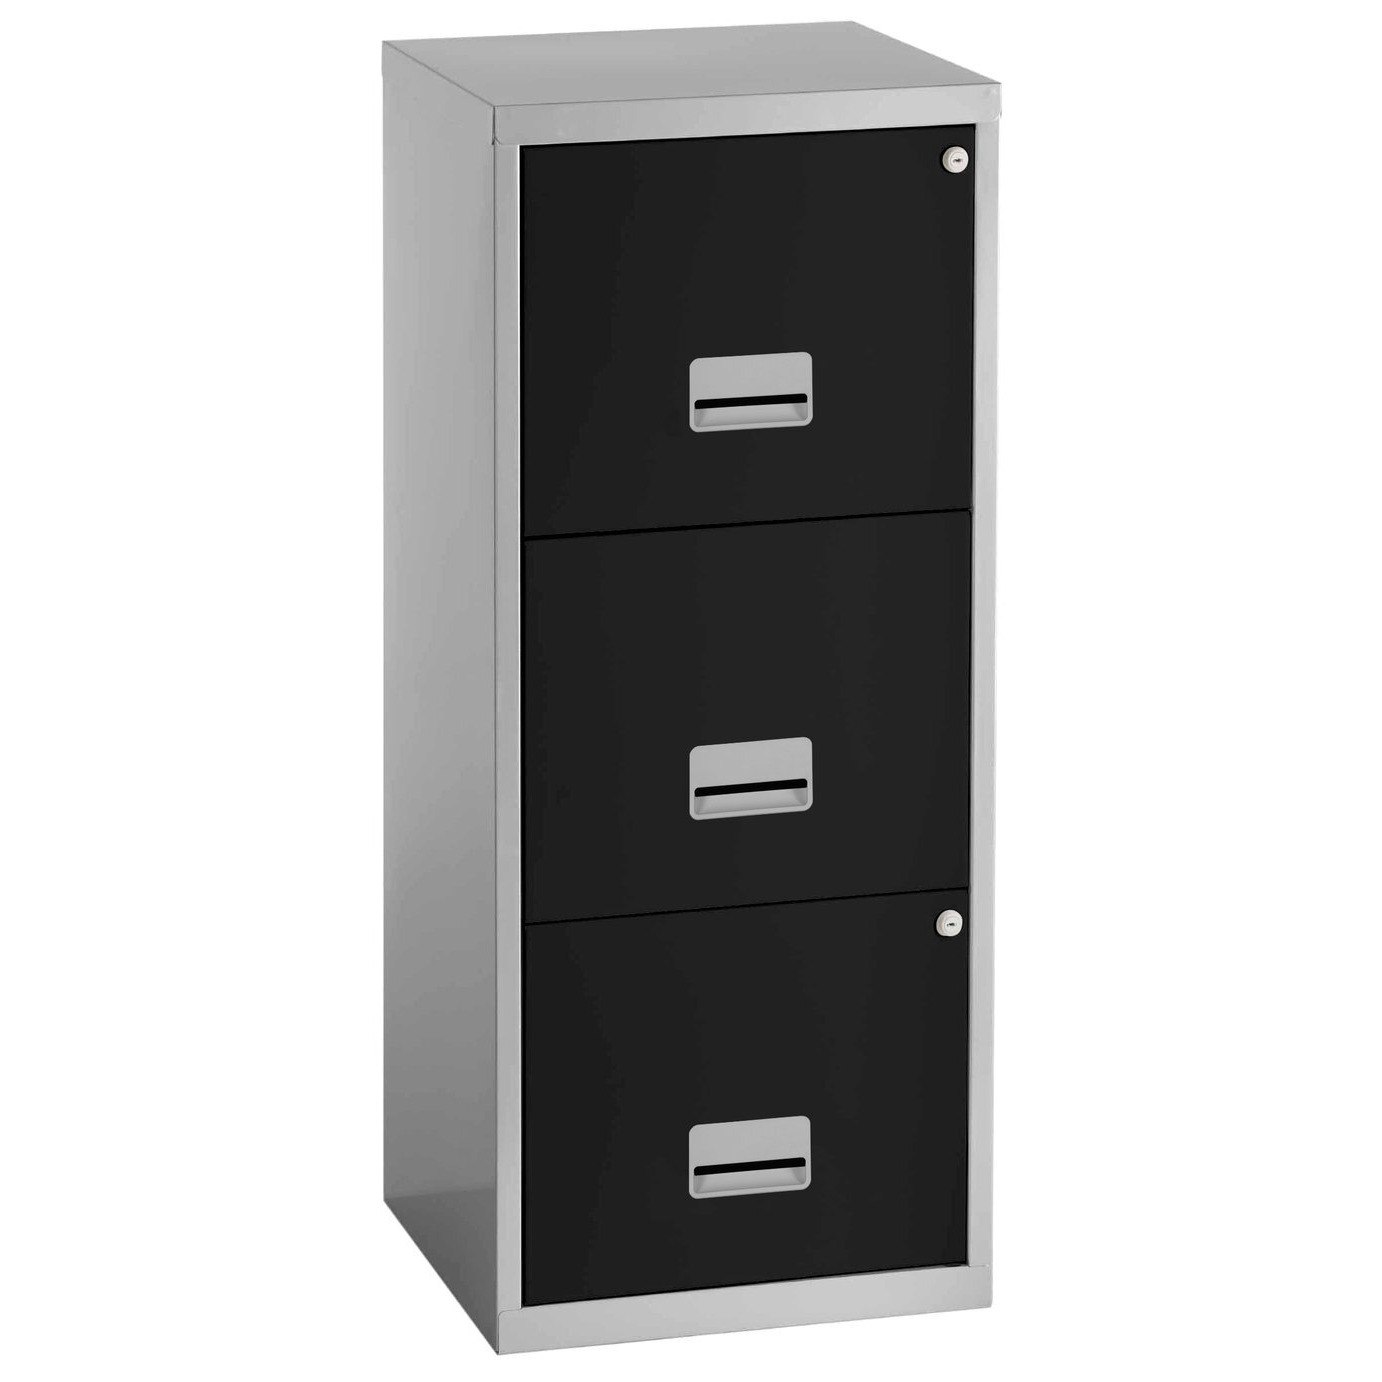 Pierre Henry 3 Drawer Maxi Filing Cabinet - Silver & Black - image 1